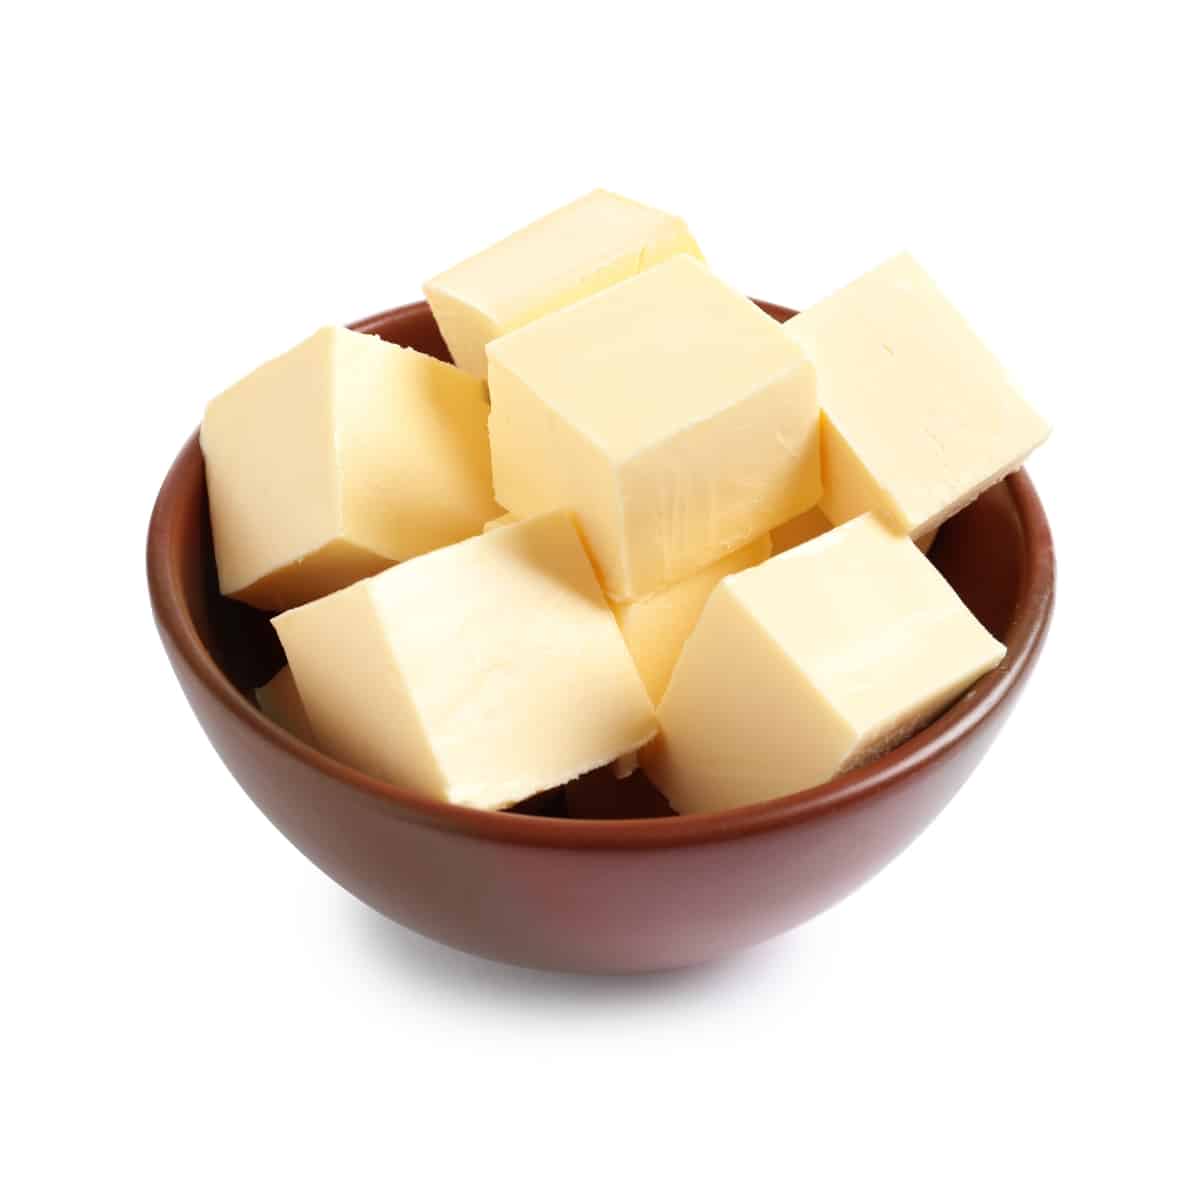 Bowl of cubed Butter on a White Counter.